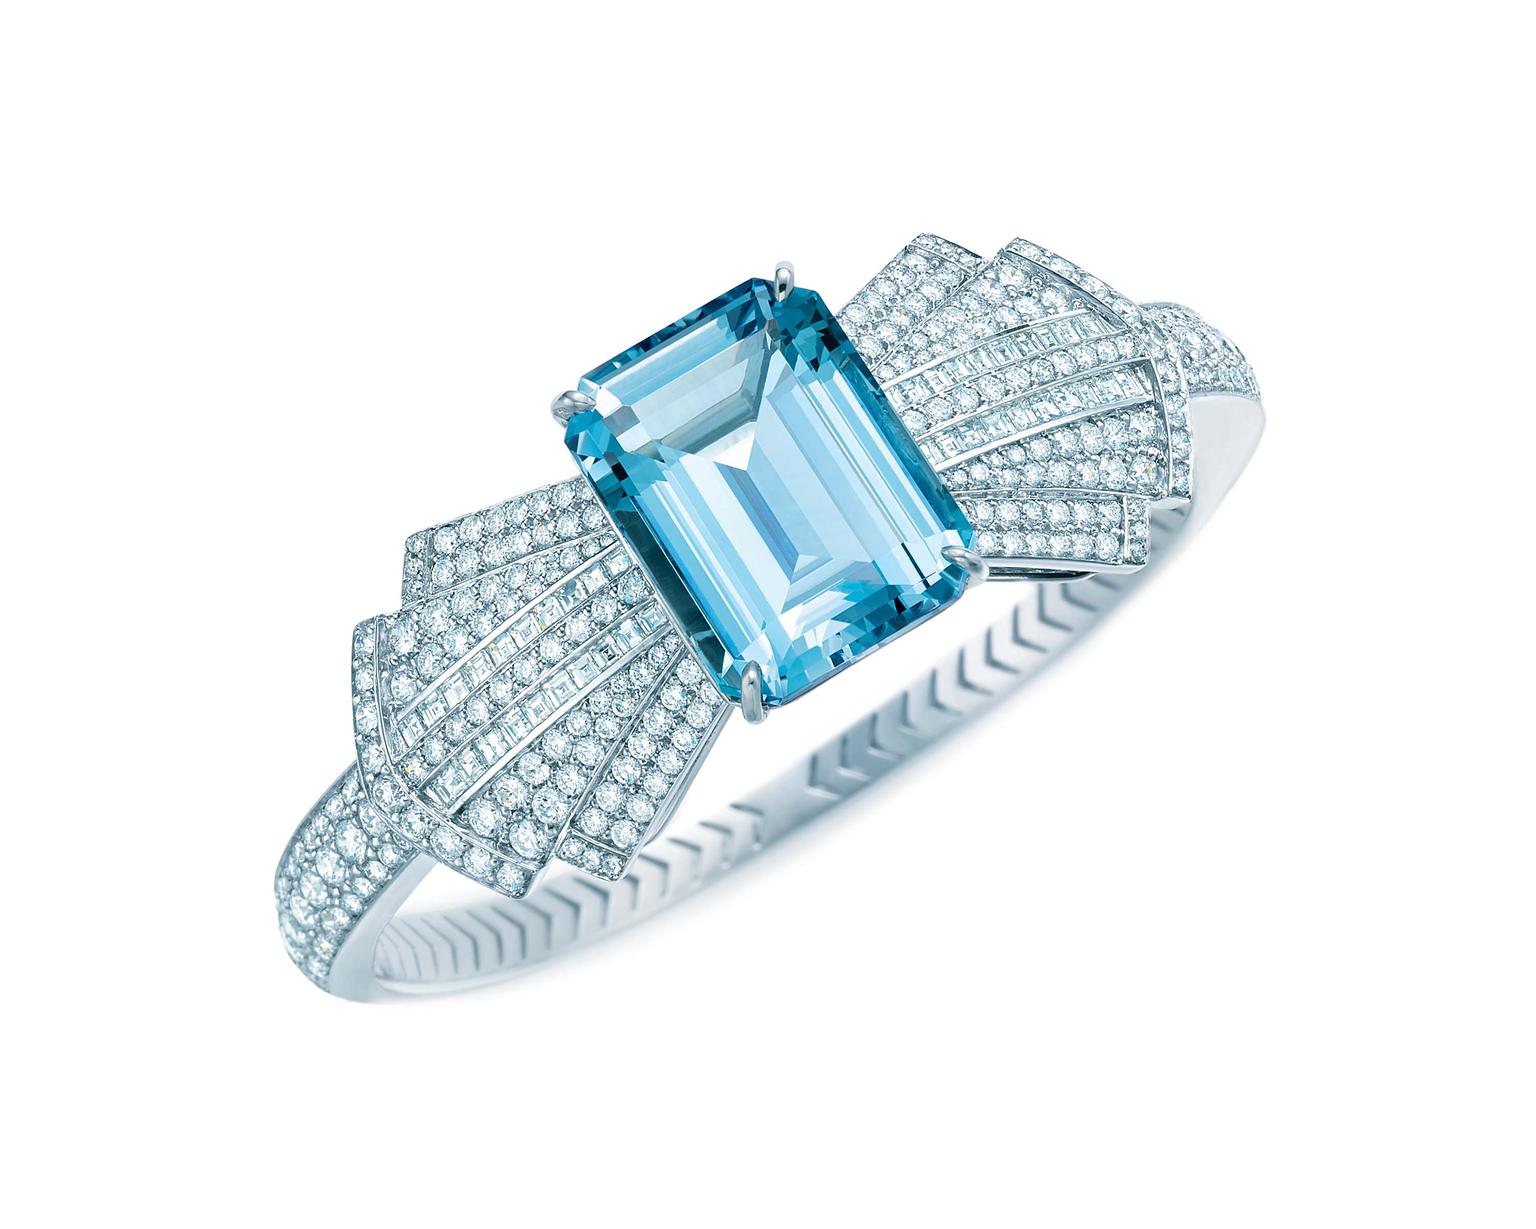 Tiffany & Co. Blue Book Collection platinum bracelet featuring a central emerald cut aquamarine surrounded by a bow tie of diamonds (£81,500).